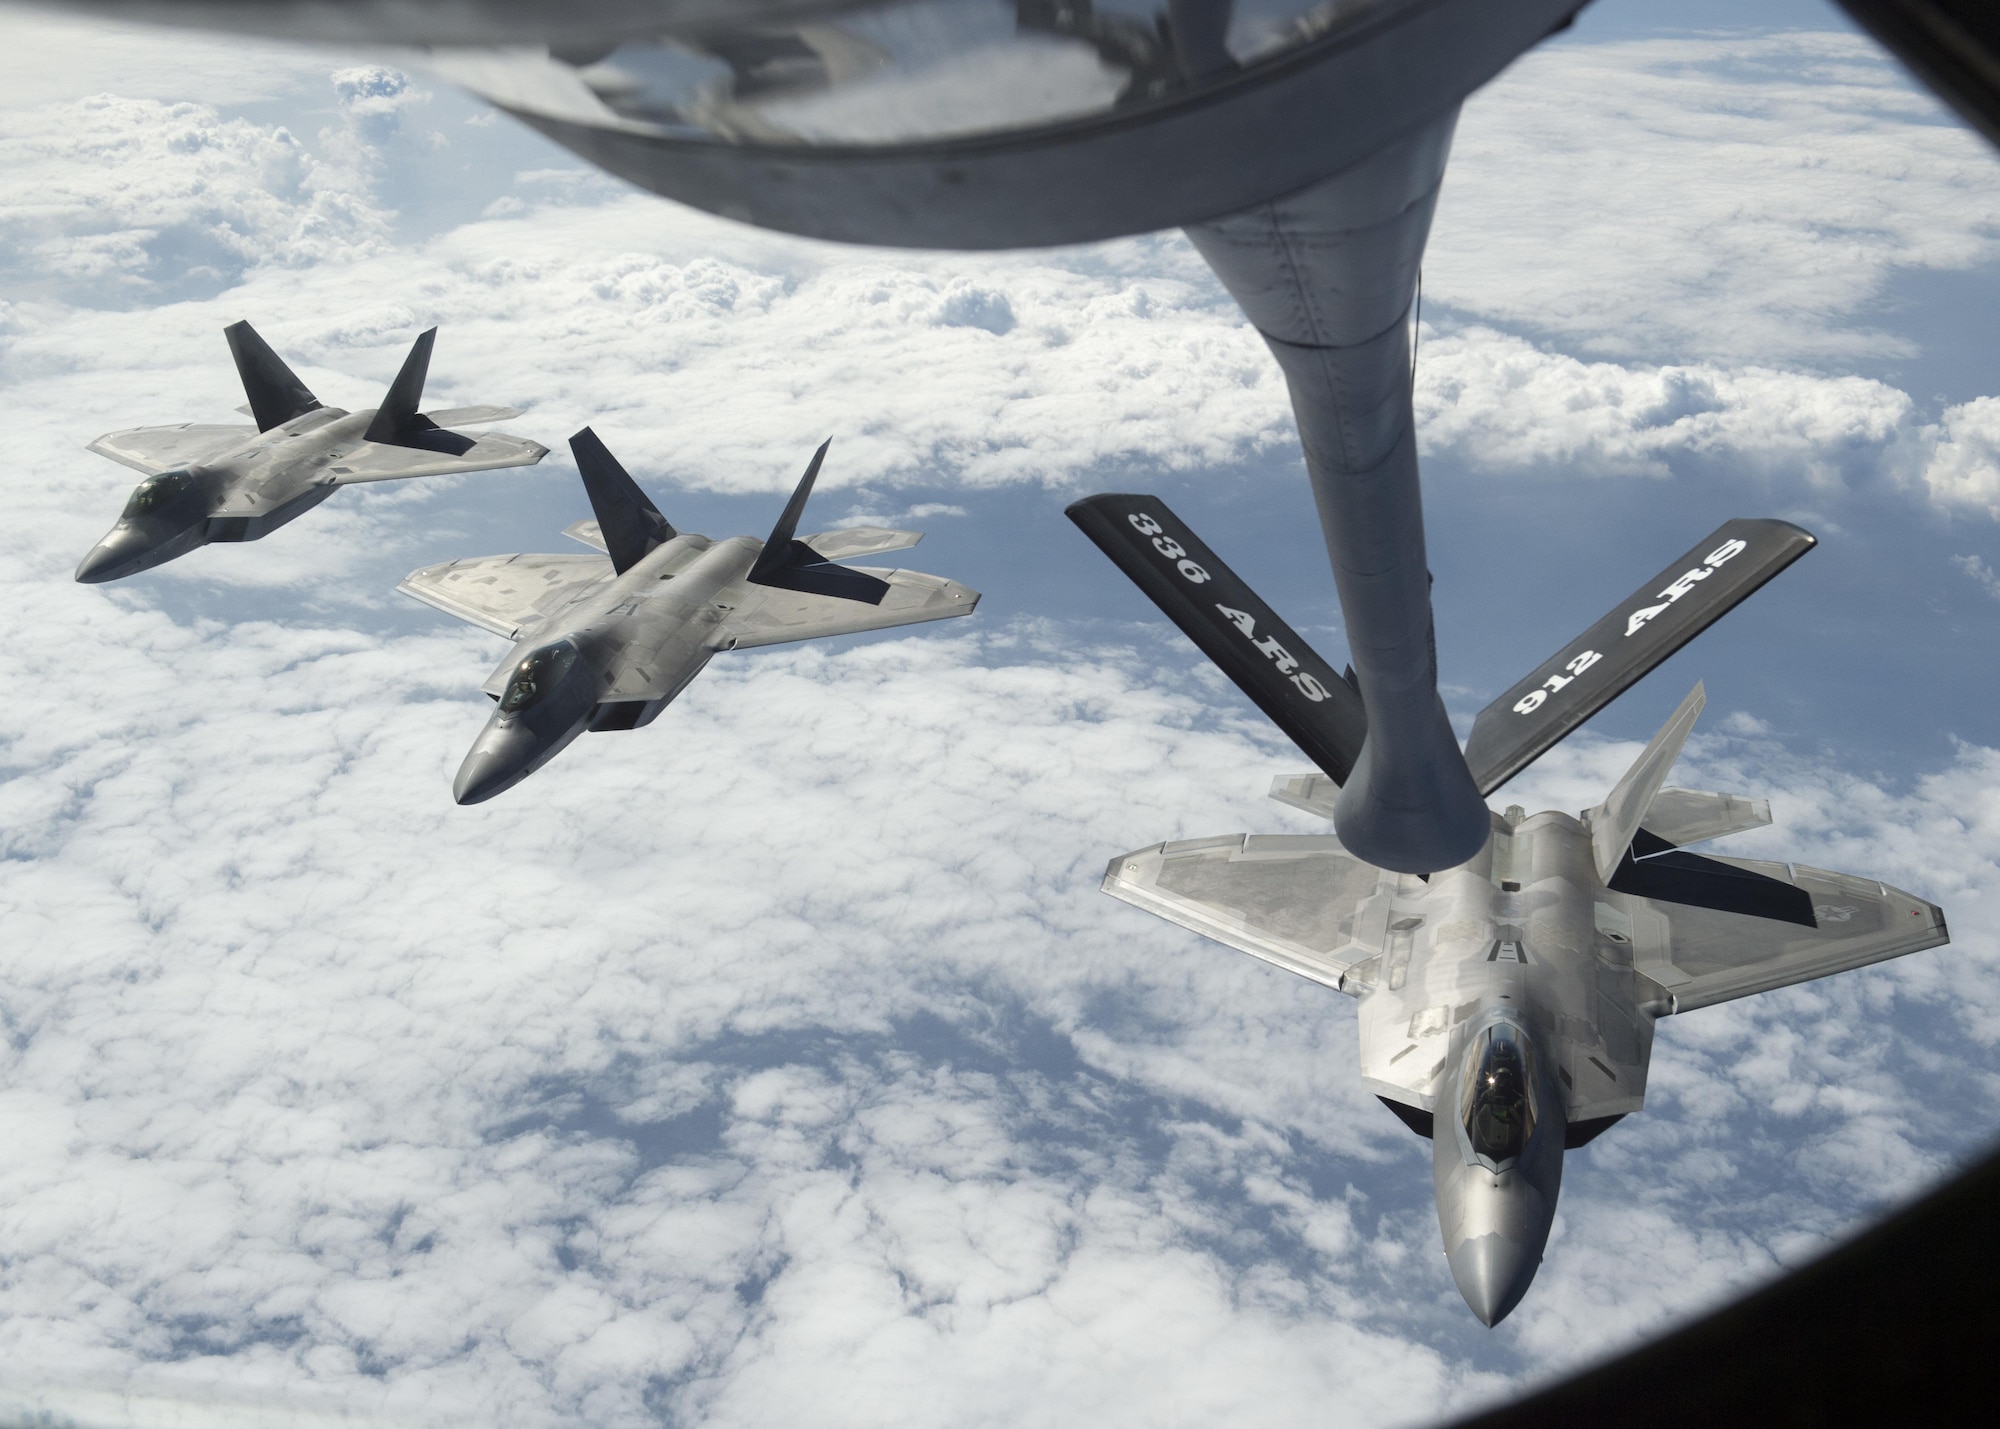 Three U.S. F-22 Raptors from the 199th Fighter Squadron and the active-duty 19th Fighter Squadron await refueling from a KC-135R Stratotanker operated by 465th Air Refueling Squadron from Tinker Air Force Base, Oklahoma, during Rim of the Pacific 2016 over Joint Base Pearl Harbor-Hickam, Hawaii, July 26, 2016. (U.S. Navy photo by Mass Communication Specialist 2nd Class Gregory A. Harden II)